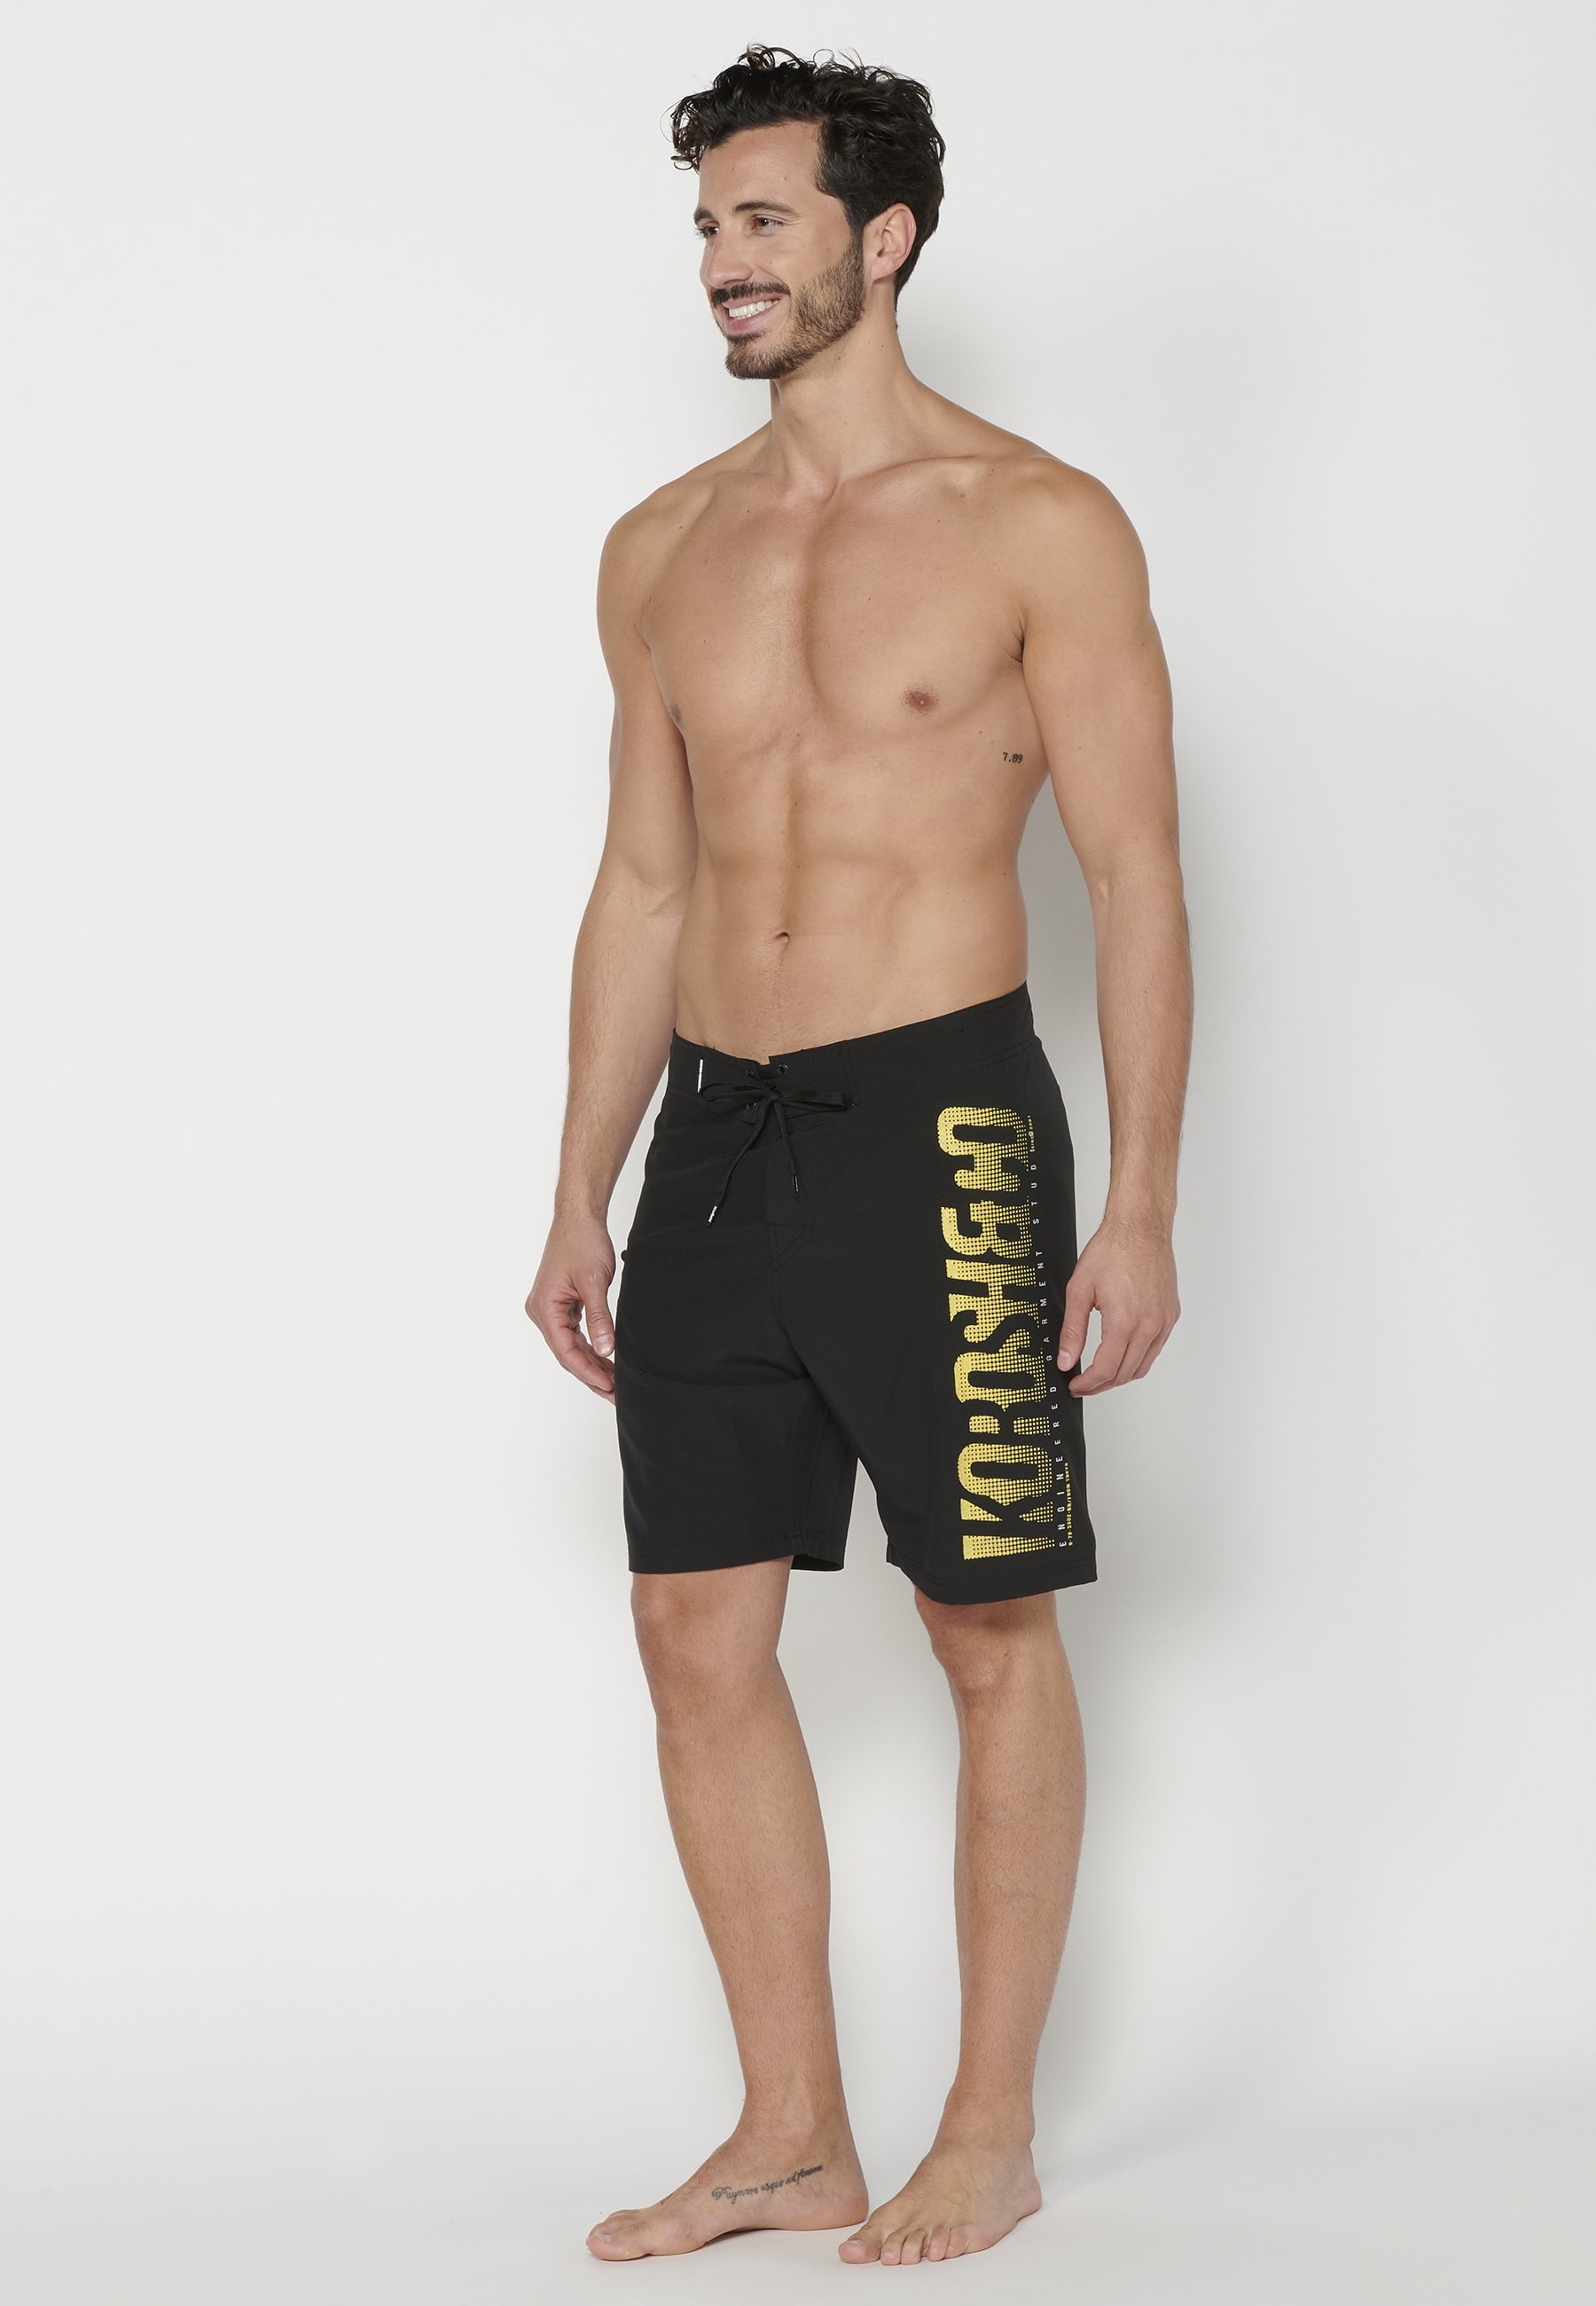 Short Surfer-style swimsuit with three Pockets in Black color for Men